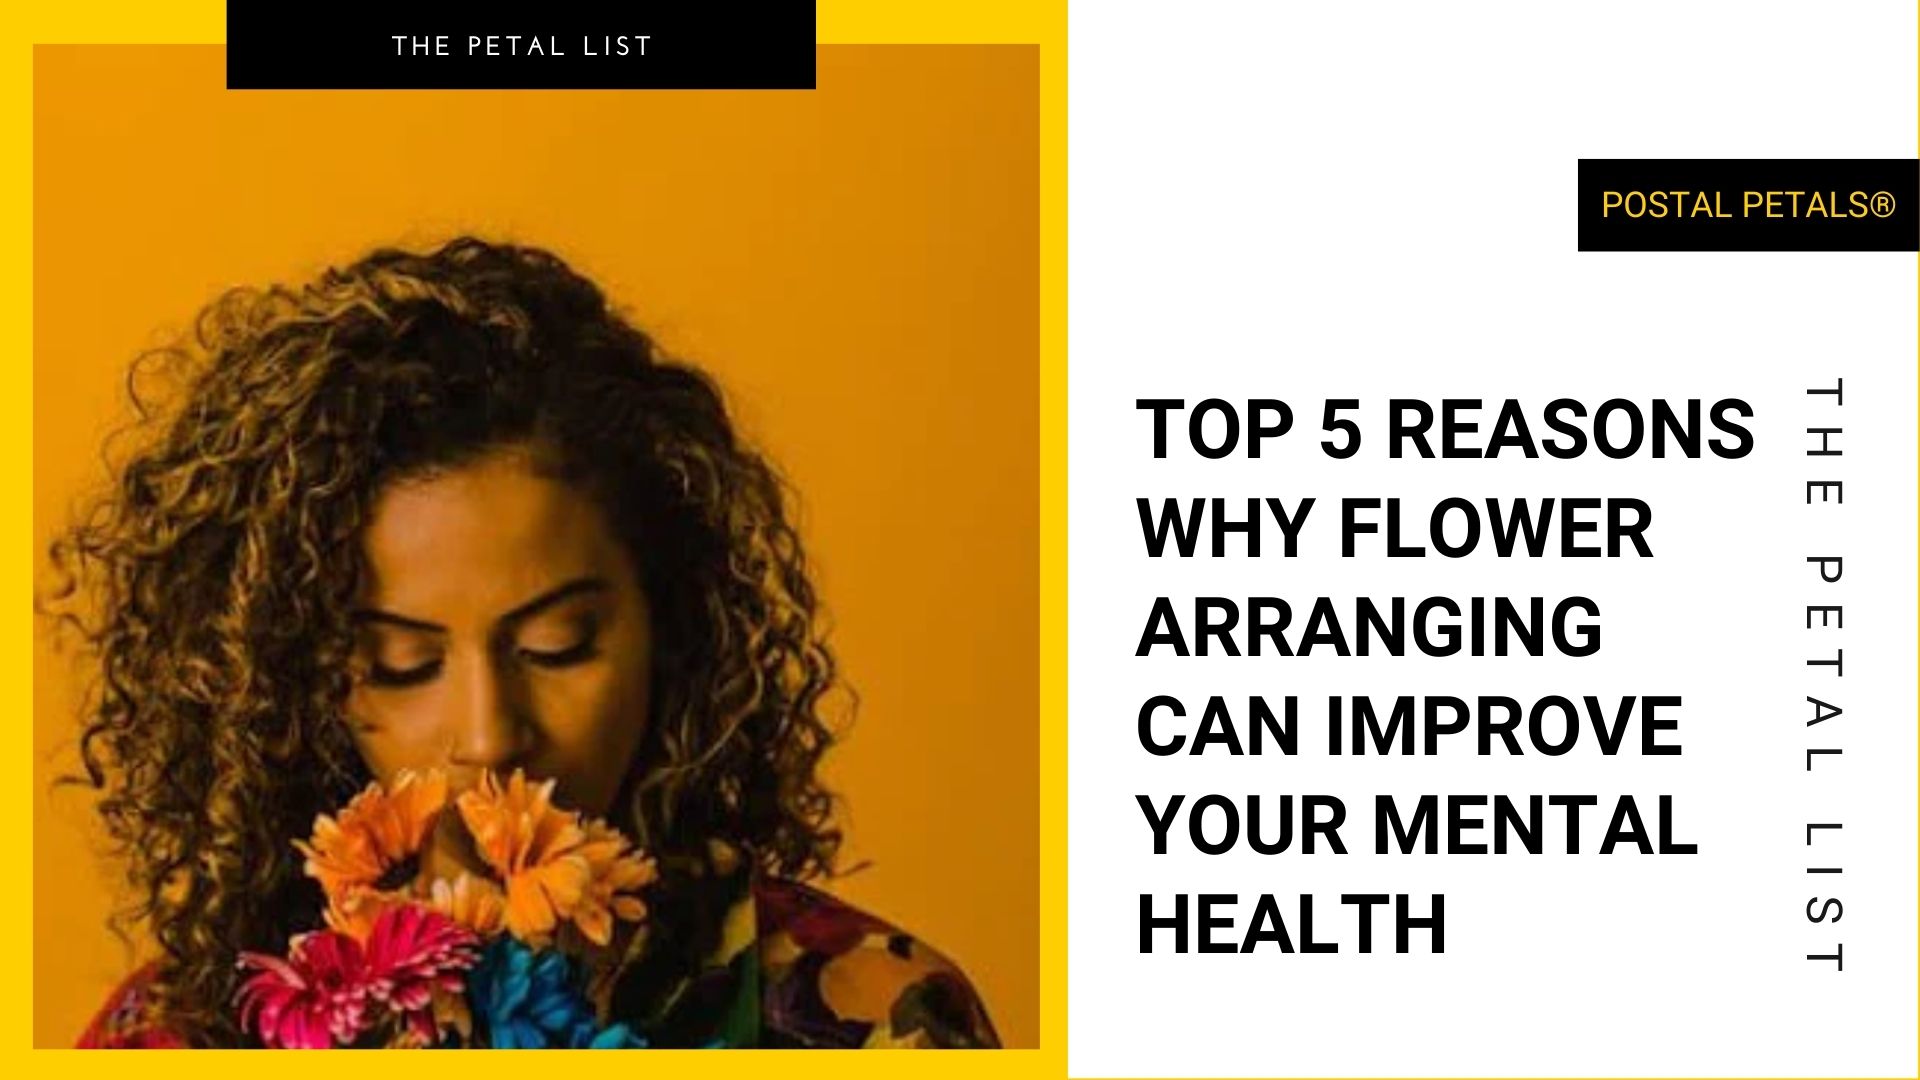 Top 5 Reasons Why Flower Arranging Can Improve Your Mental Health